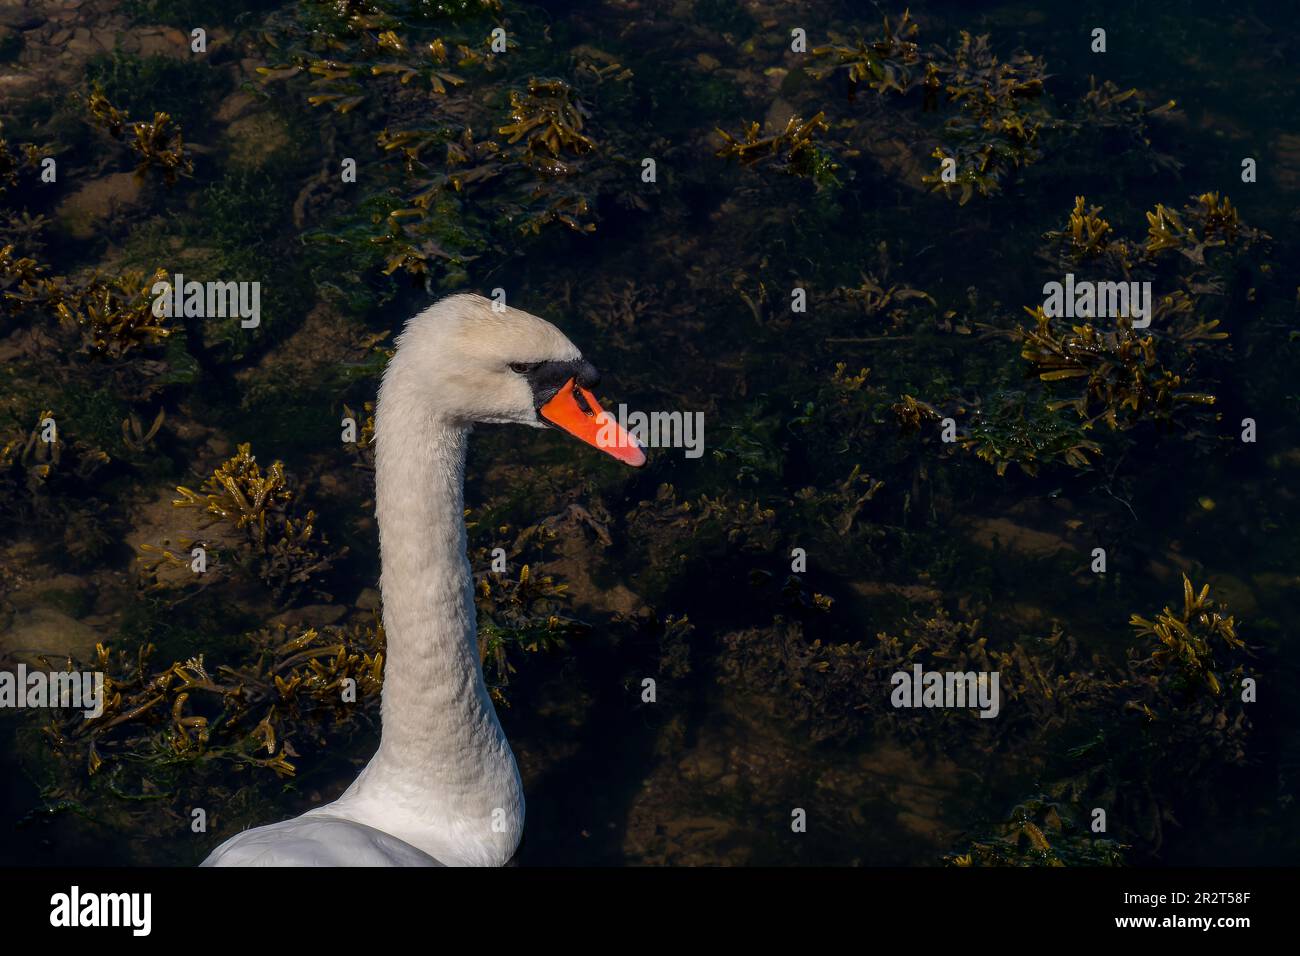 The head of a bird on a long white neck. Portrait of a bird, copy space. White swan Stock Photo